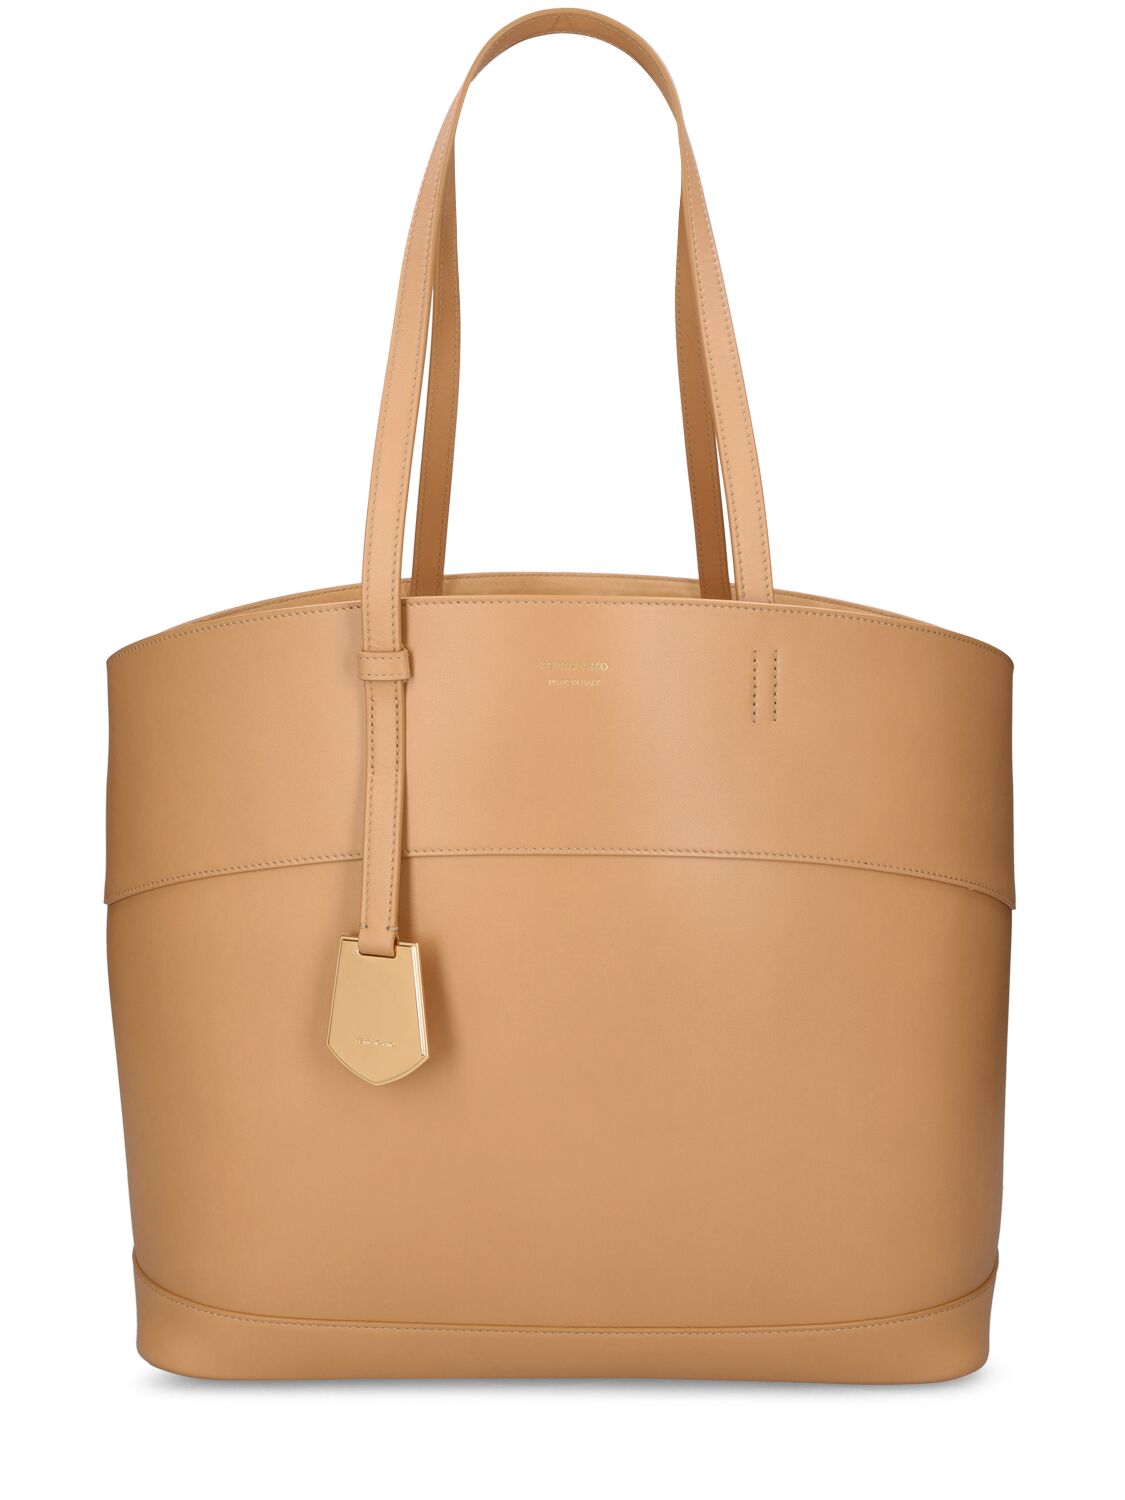 Medium Entry Leather Tote Bag